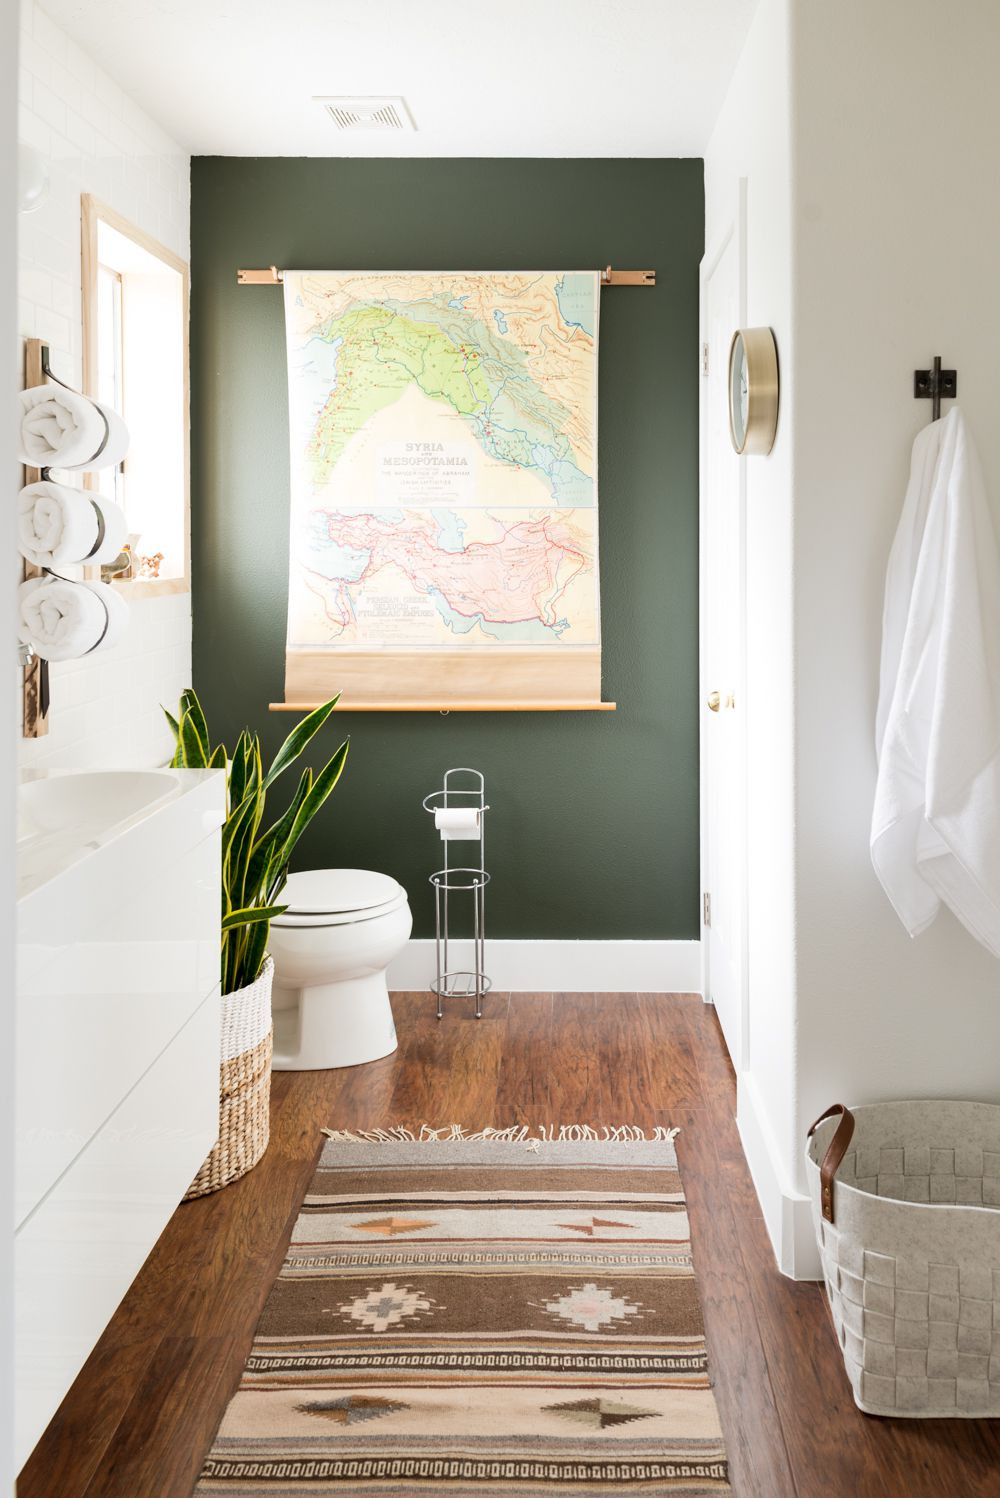 Accent Wall Bathroom
 The 9 Best Accent Wall Colors